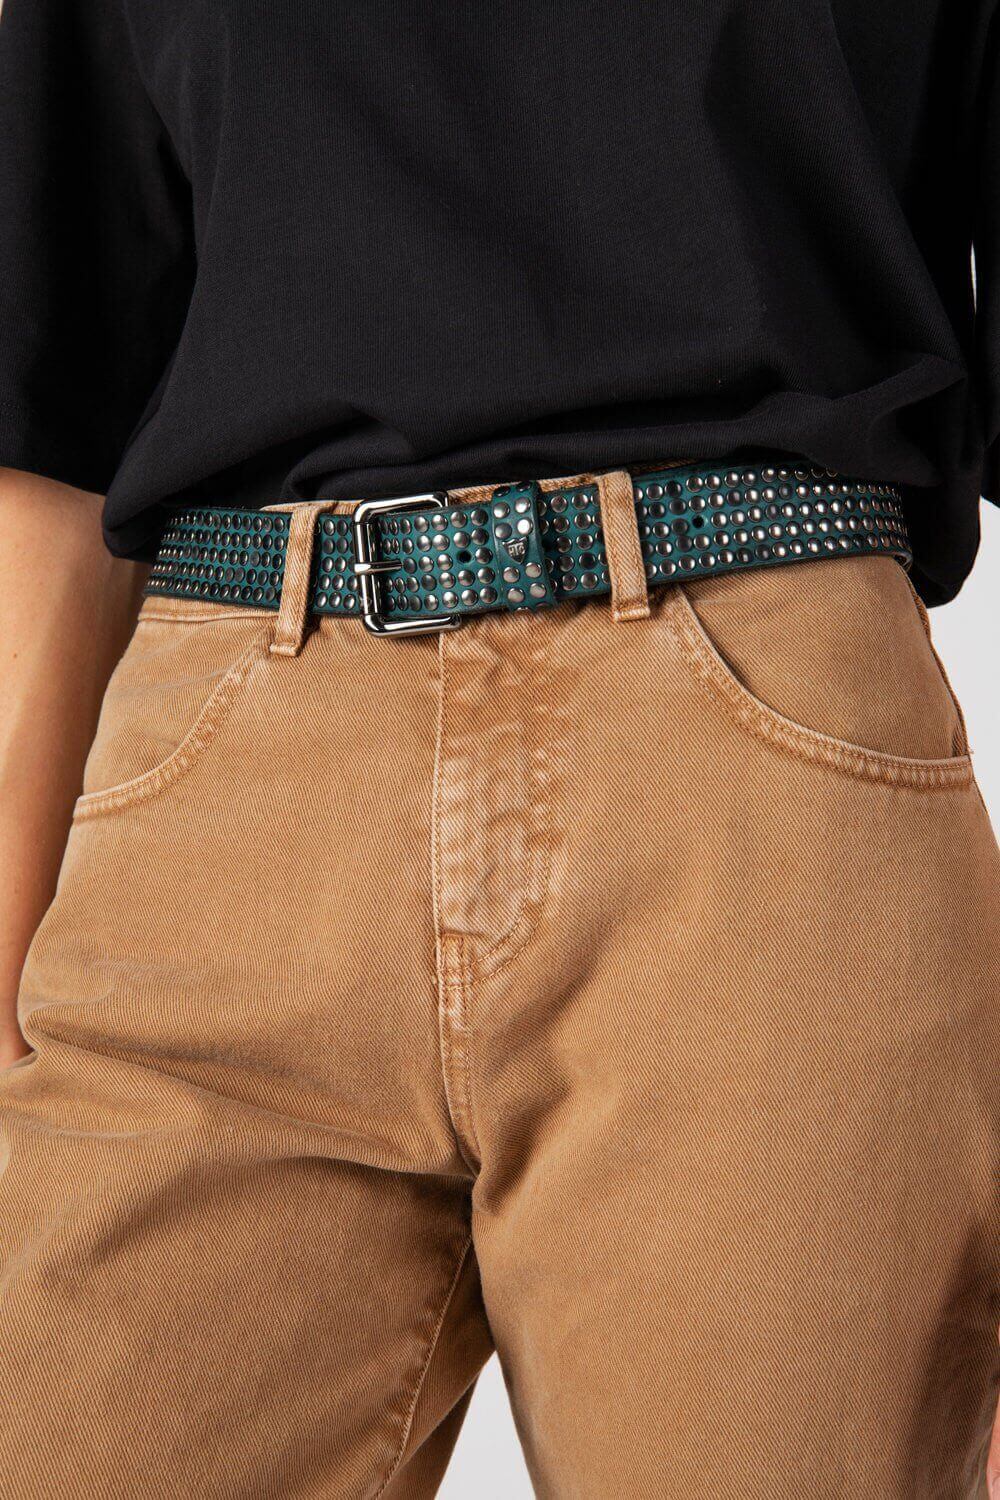 5.000 STUDS COLOR BELT Leather belt with mixed studs, brass buckle, studded loop and rivet with engraved logo. Made in Italy, 3.5 cm height. HTC LOS ANGELES